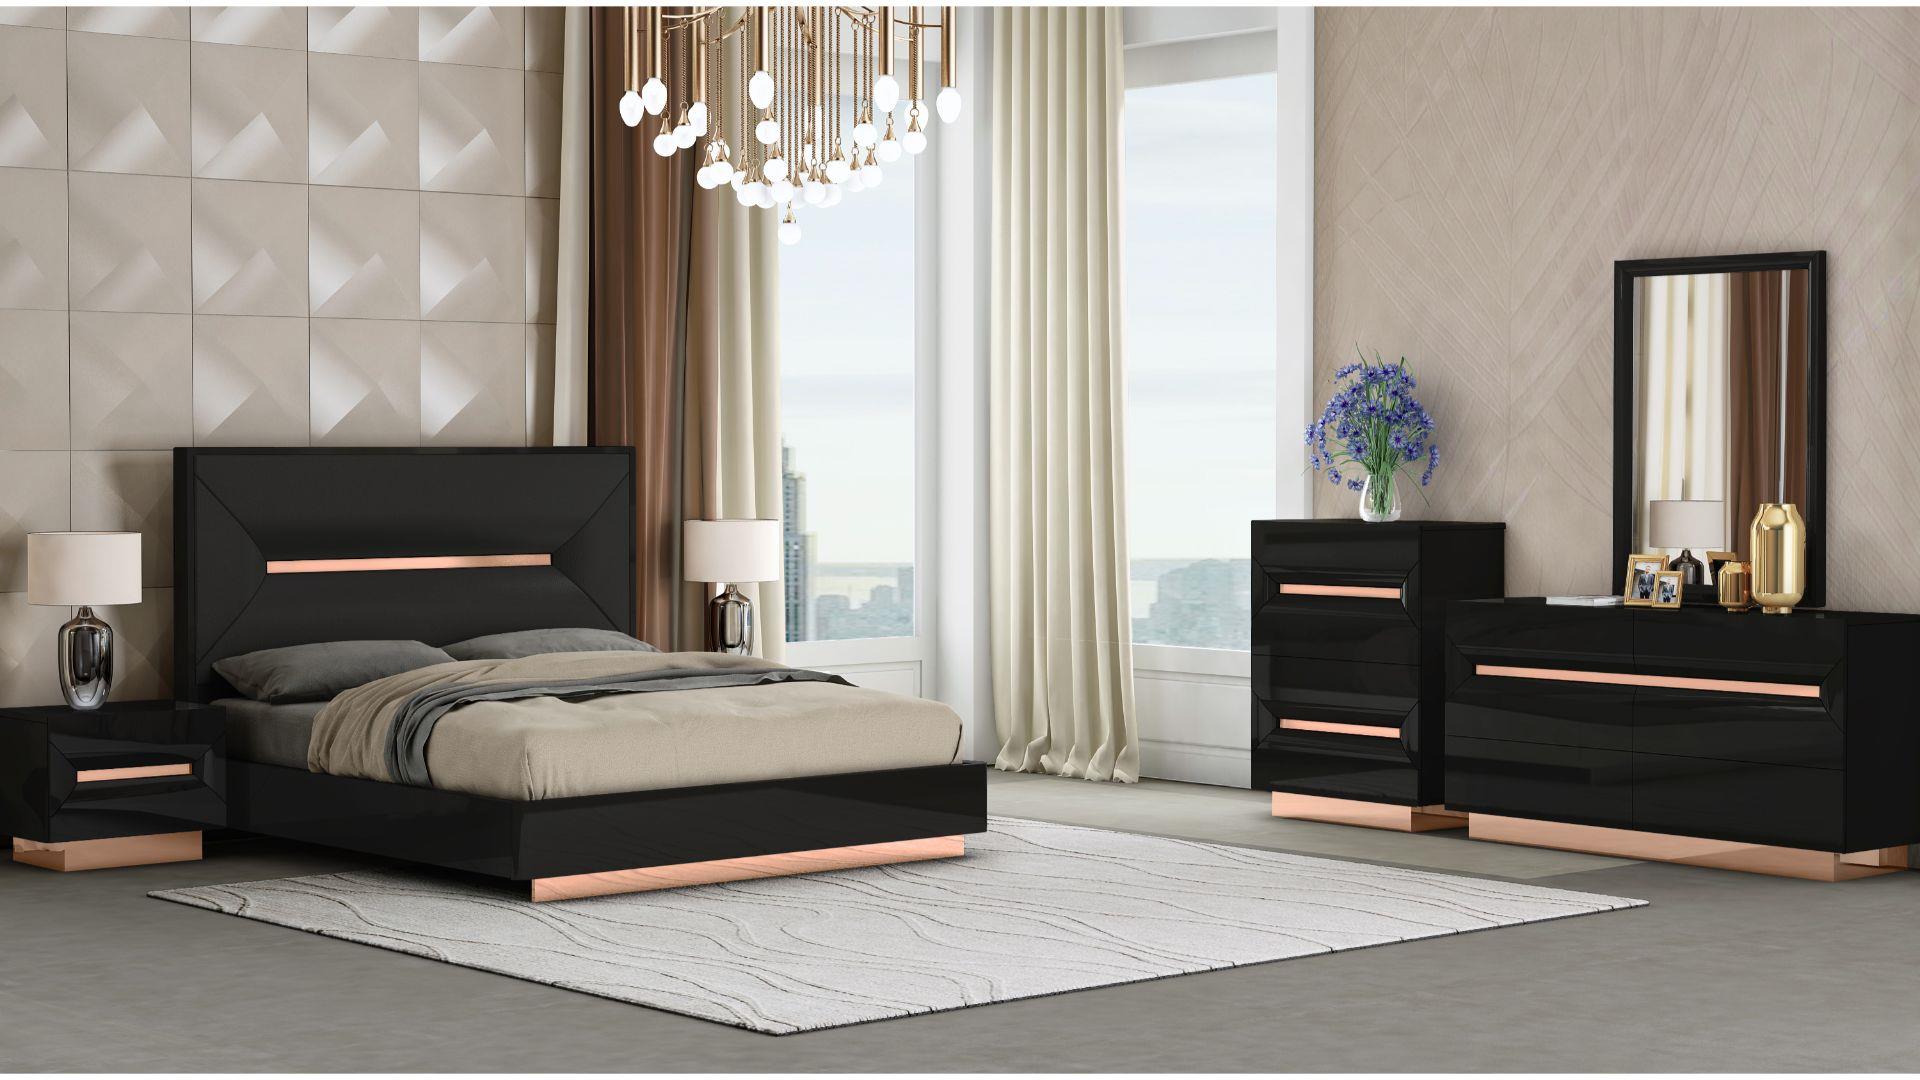 Talia Black & Gold Bedroom collection 2071